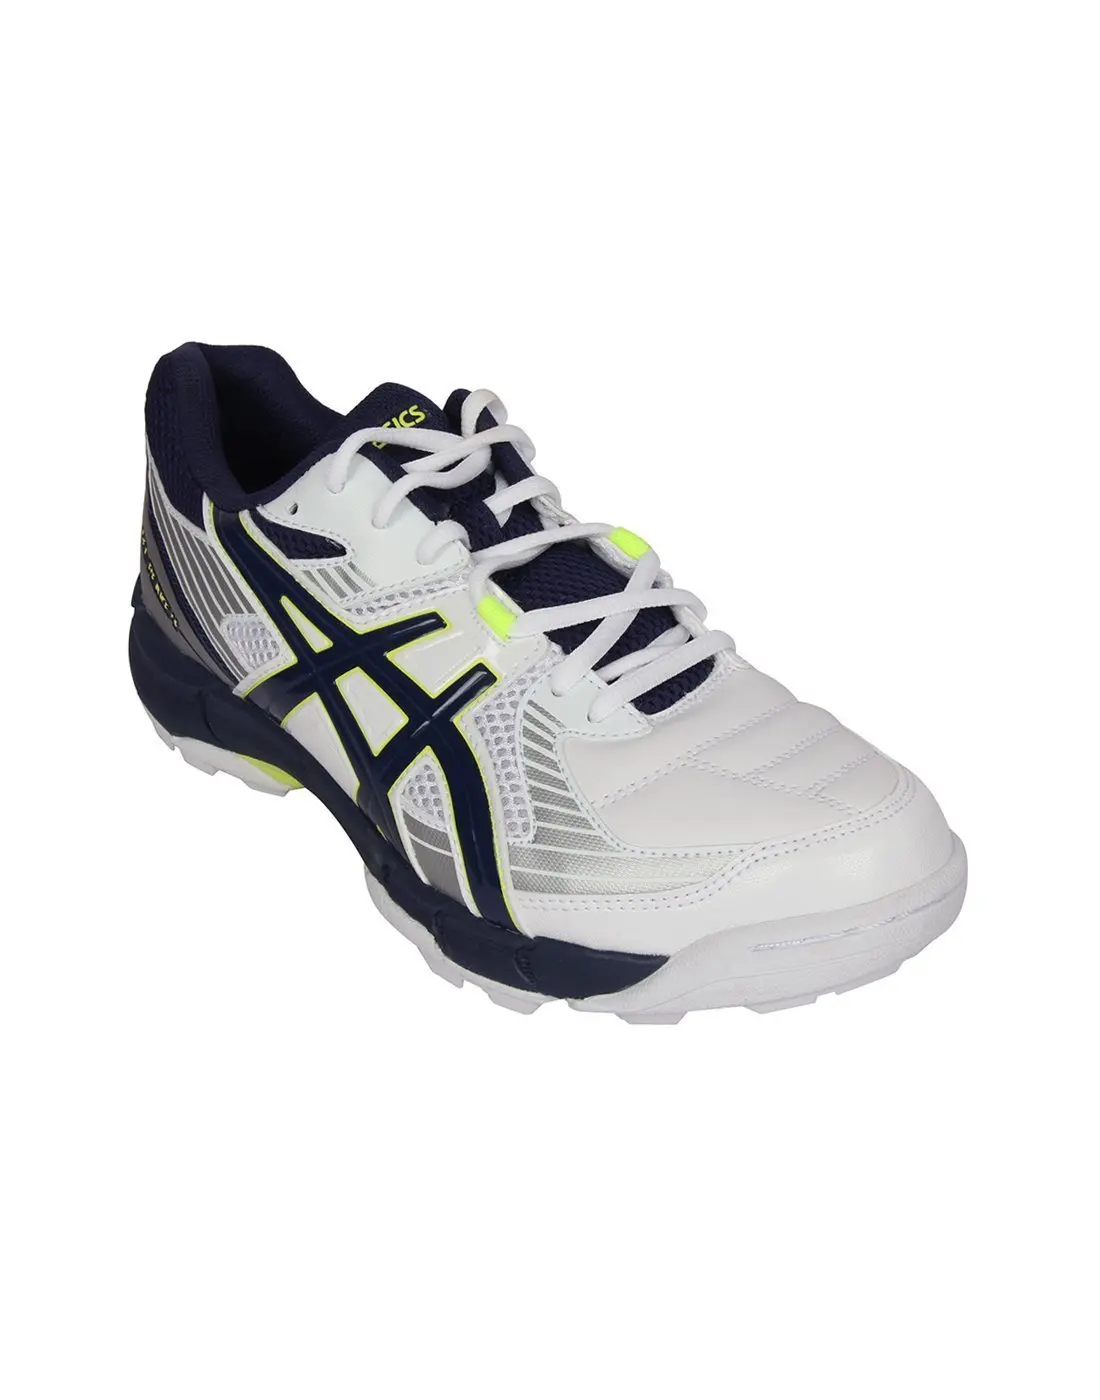 asics spikes cricket shoes